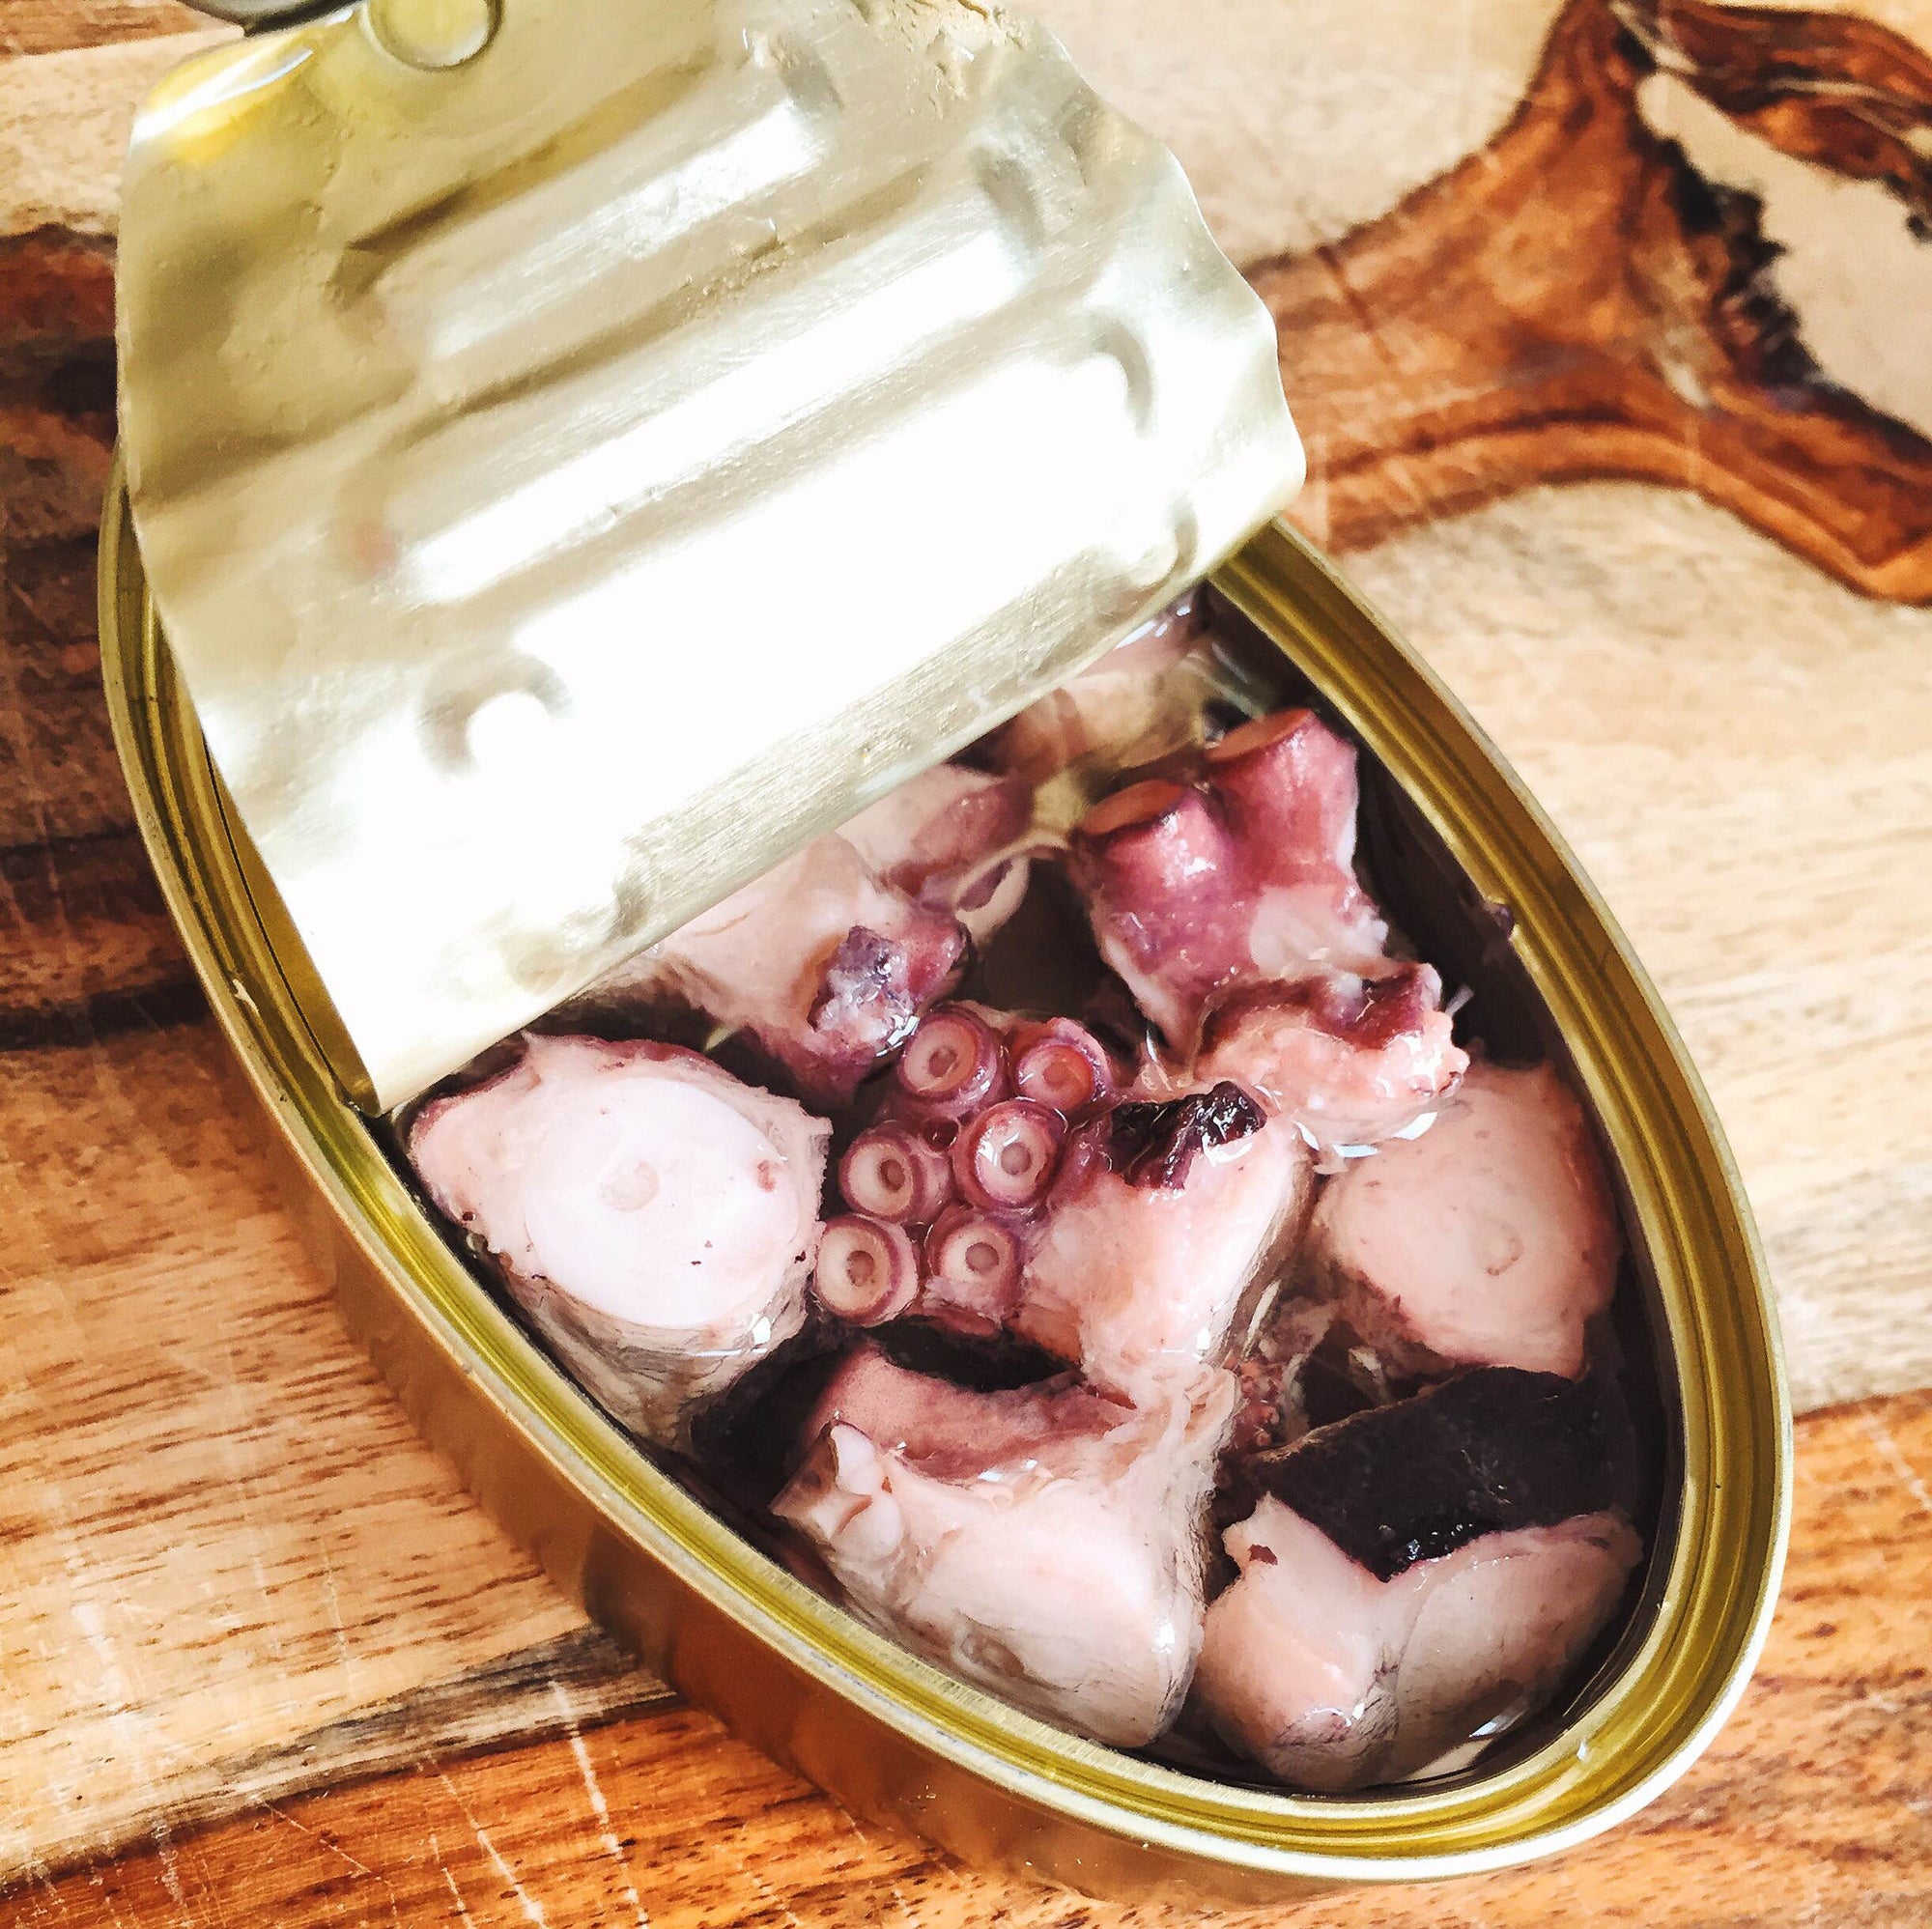 Octopus in Olive Oil - Spanish canned seafood - Donostia Foods